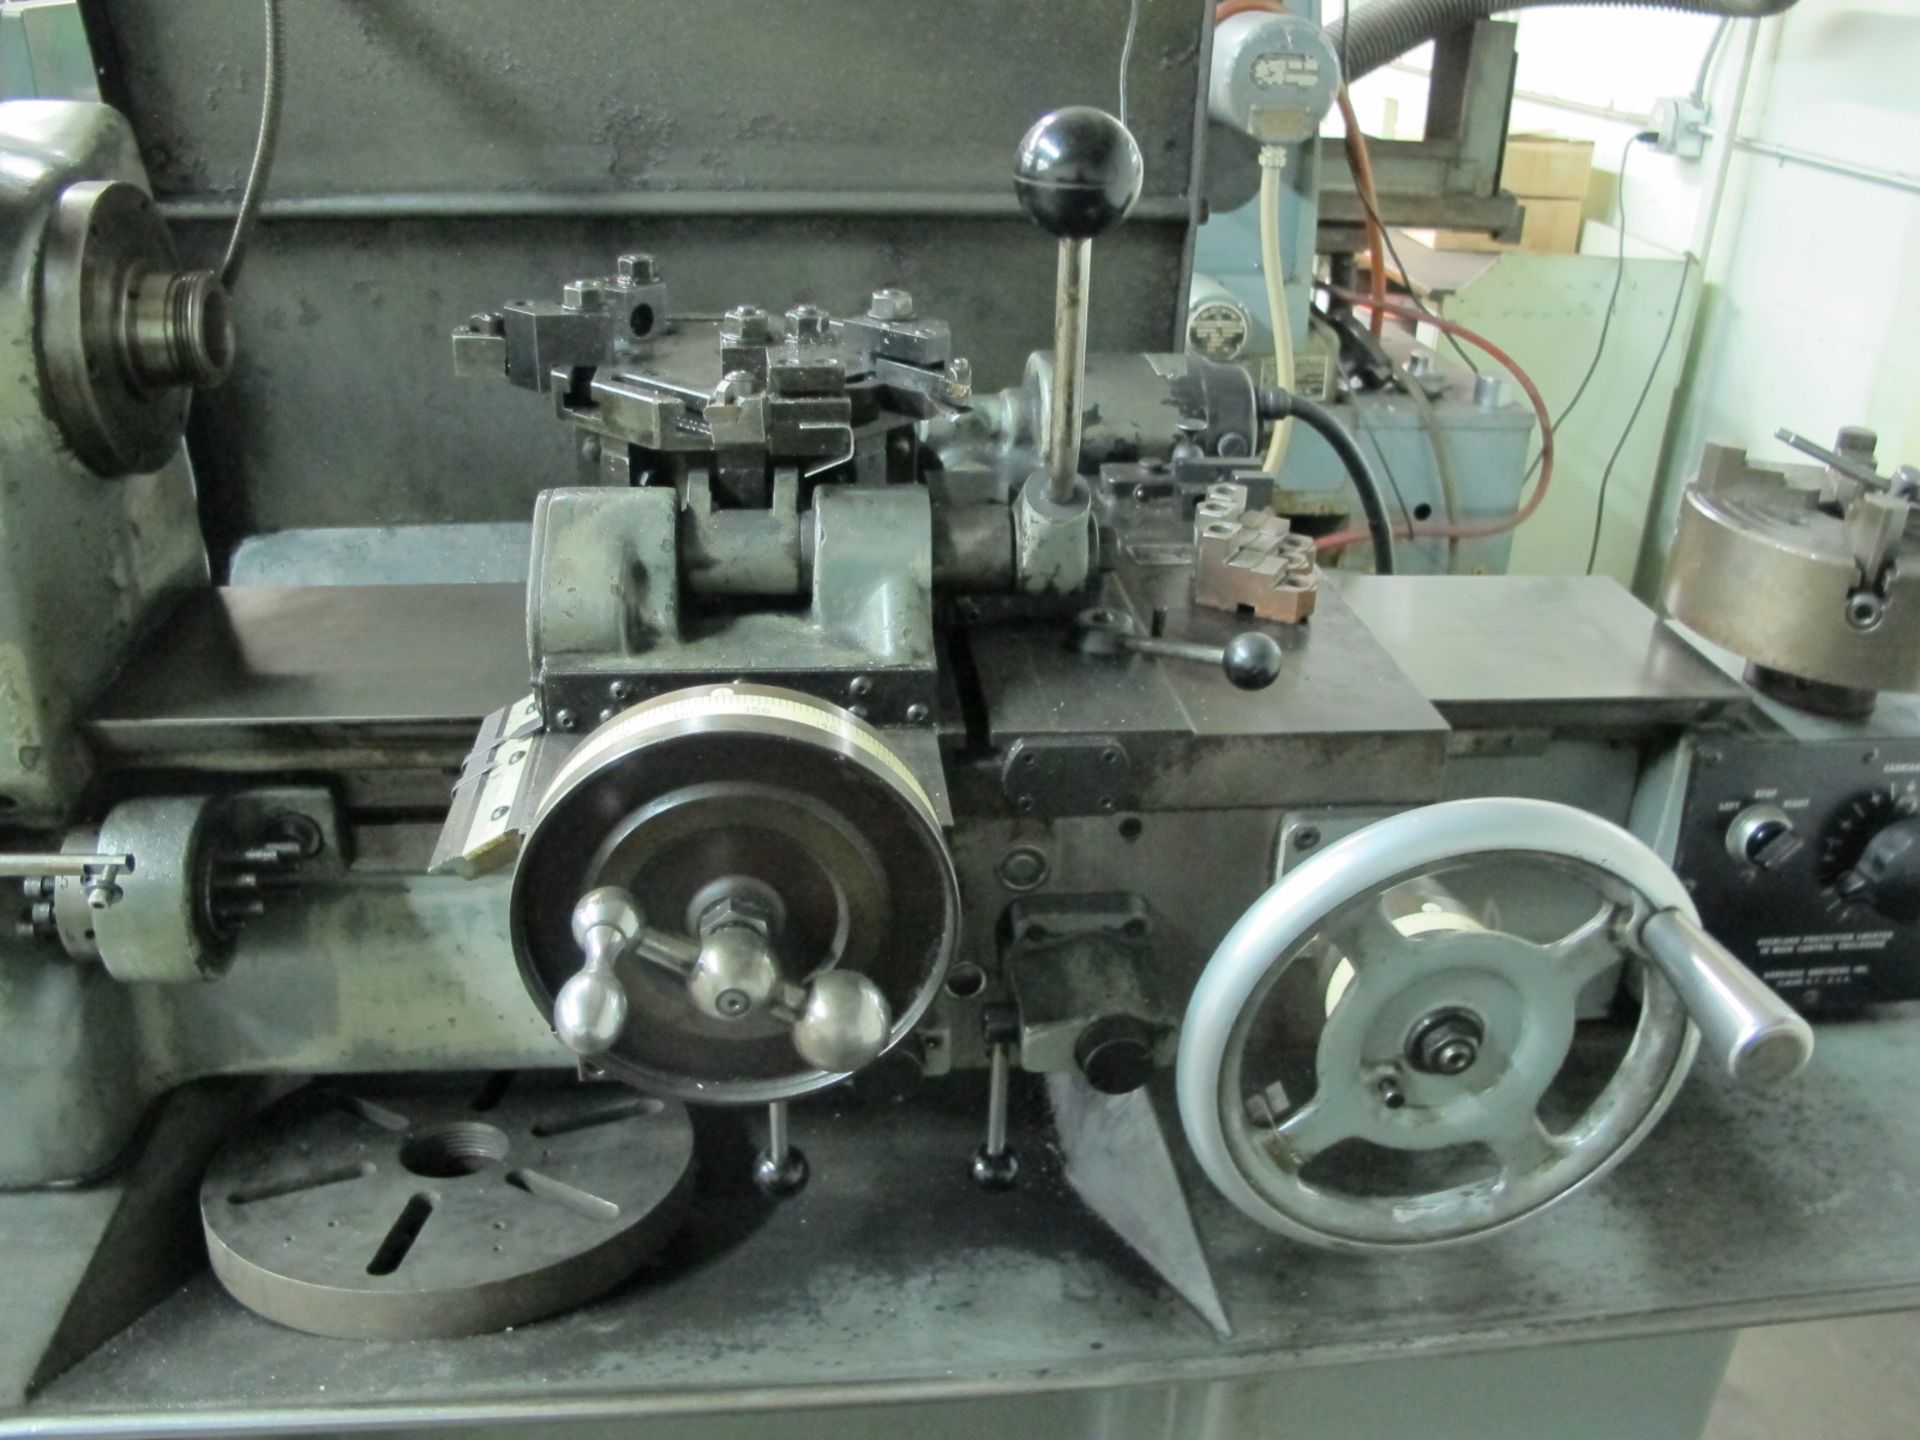 Hardinge mdl. HC Hand Chuckers w/ 125-3000 RPM, 8-Station Turret, 5C Collet Closer, Power Feeds - Image 3 of 4